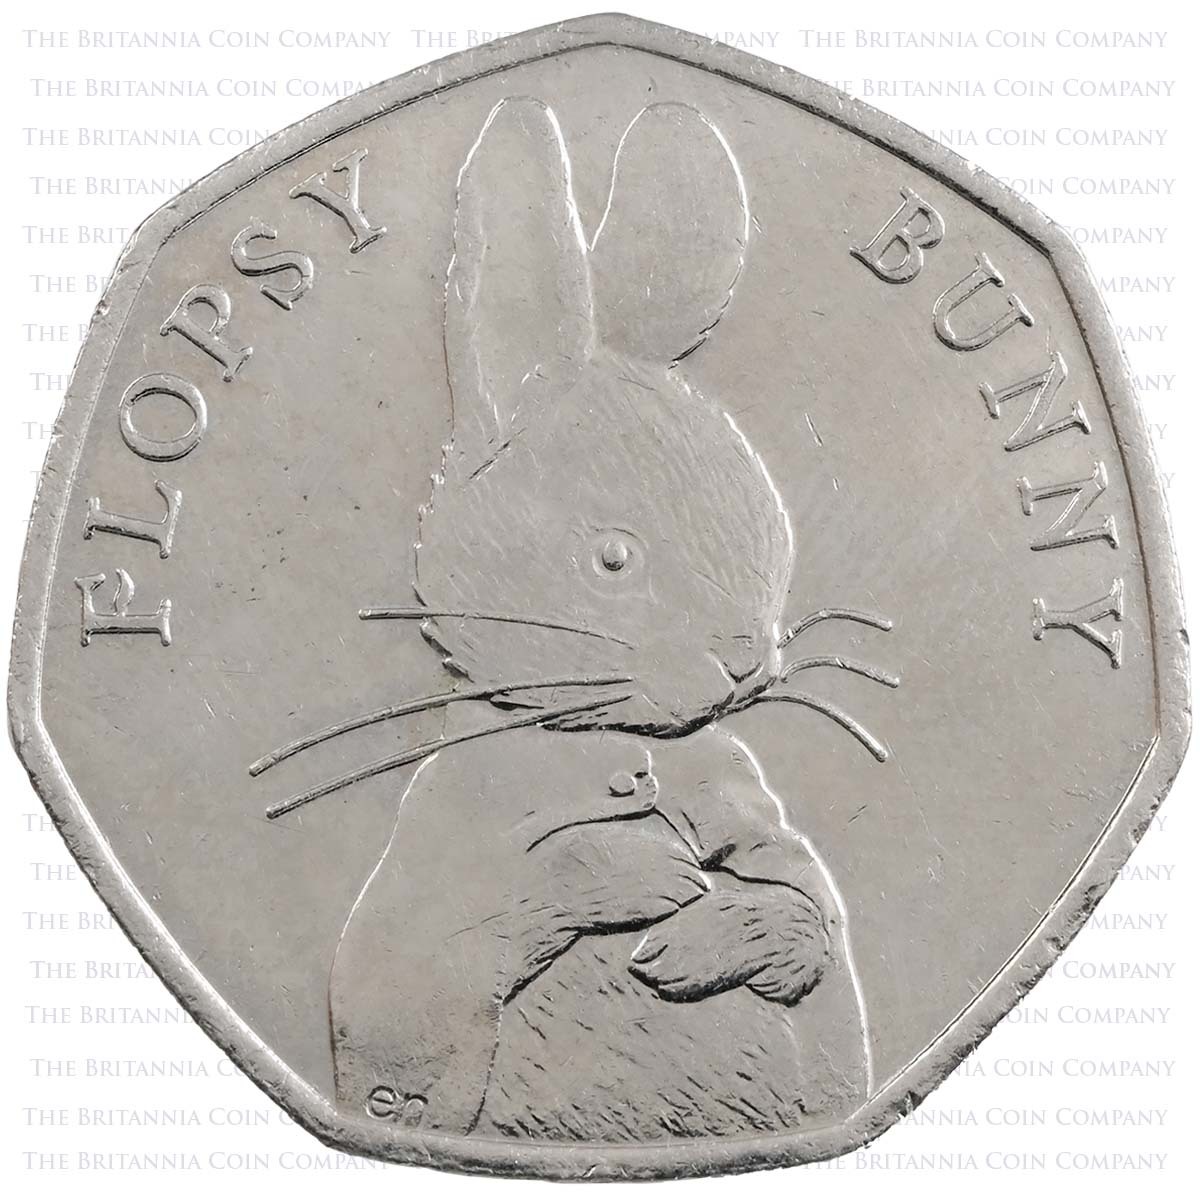 2018 Beatrix Potter Flopsy Bunny Circulated Fifty Pence Coin Reverse